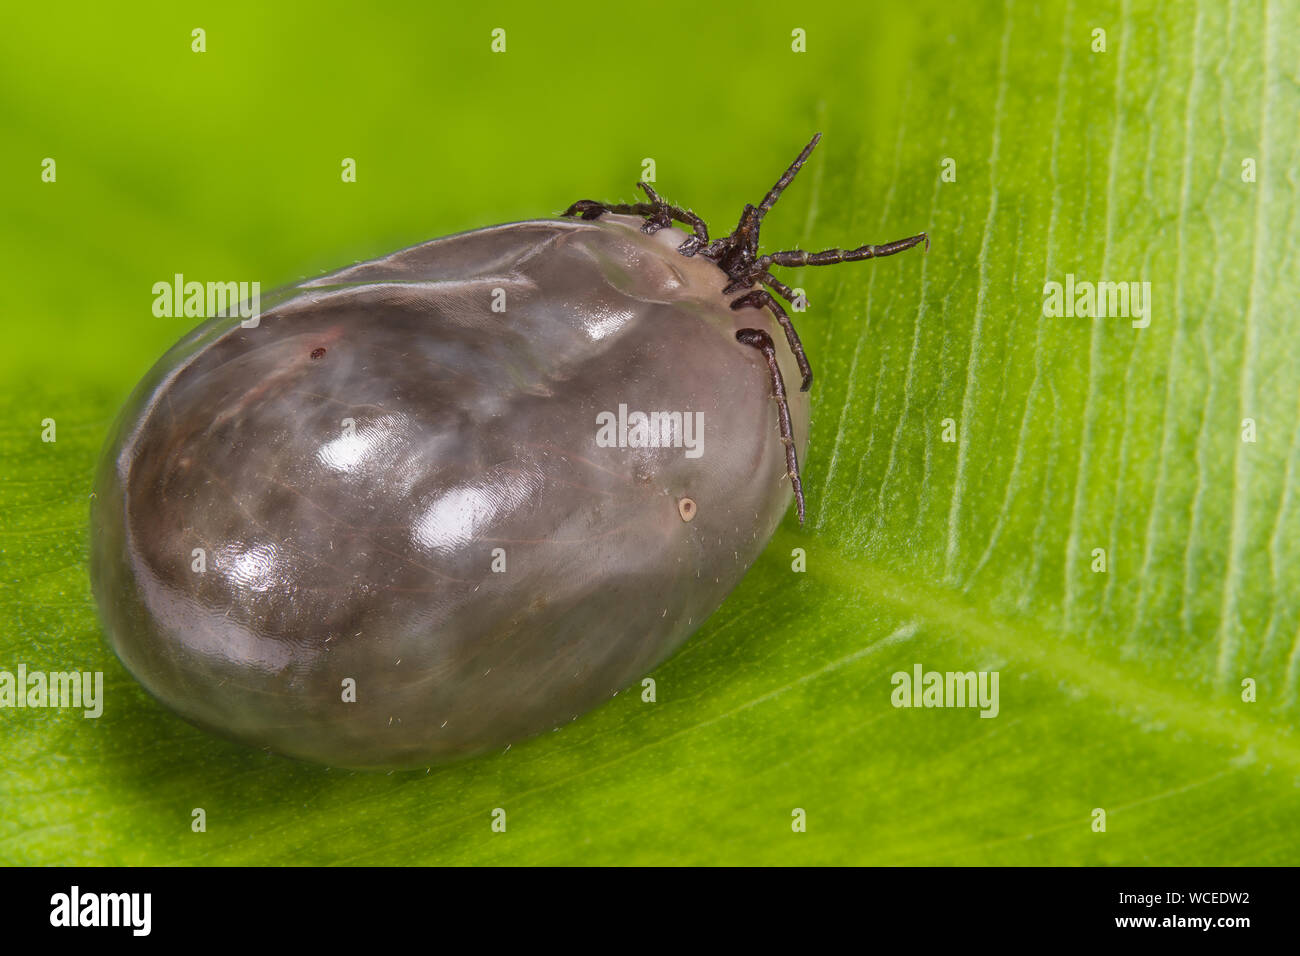 Underside of an engorged female deer tick detail. Ixodes ricinus. Bloated parasitic mite with brown-gray body full of blood on green leaf background. Stock Photo